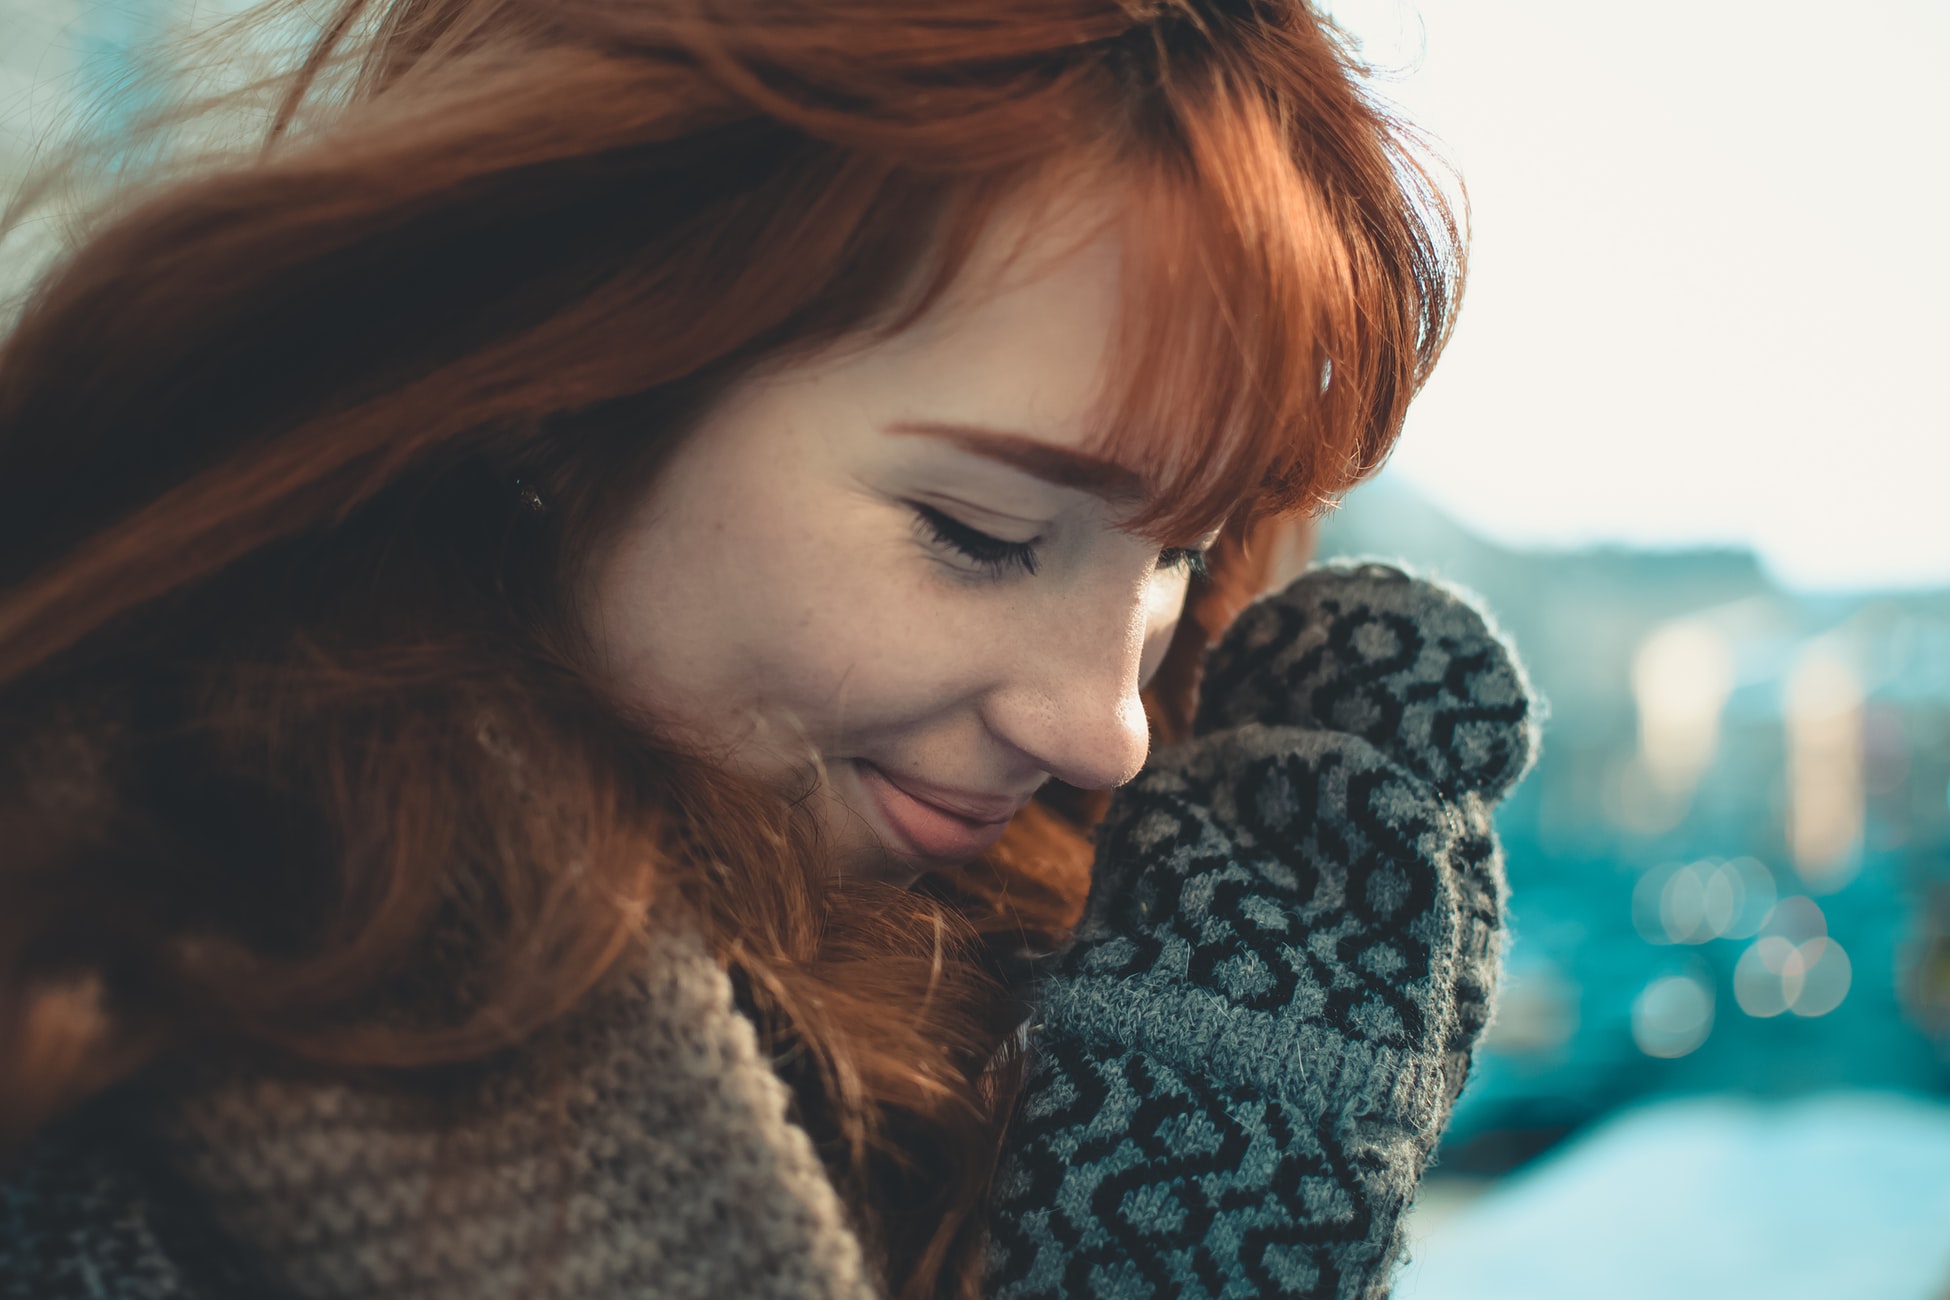 Young woman with mittens, looking smitten.